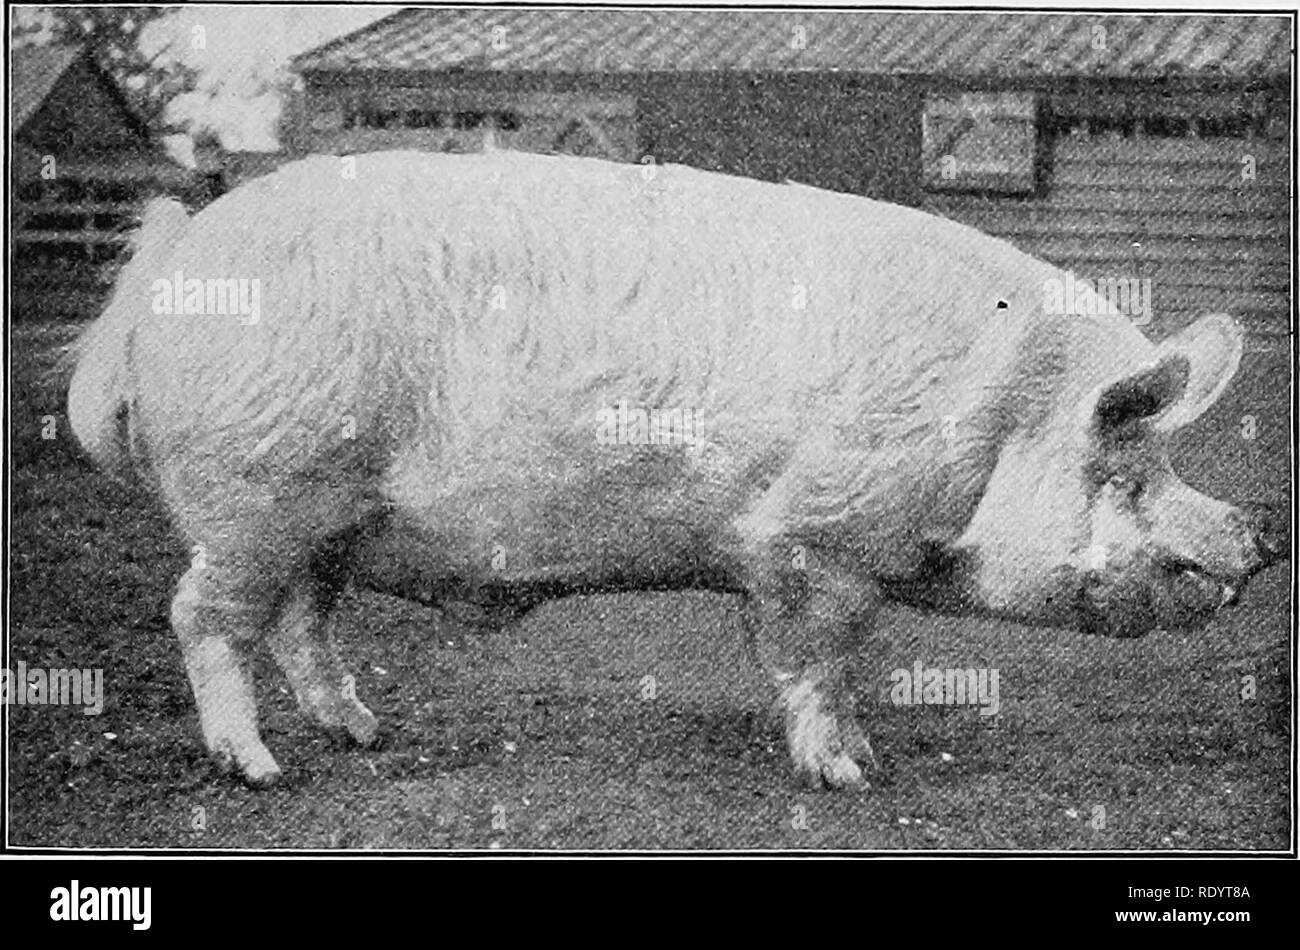 Pig In A Show Black And White Stock Photos Images Alamy